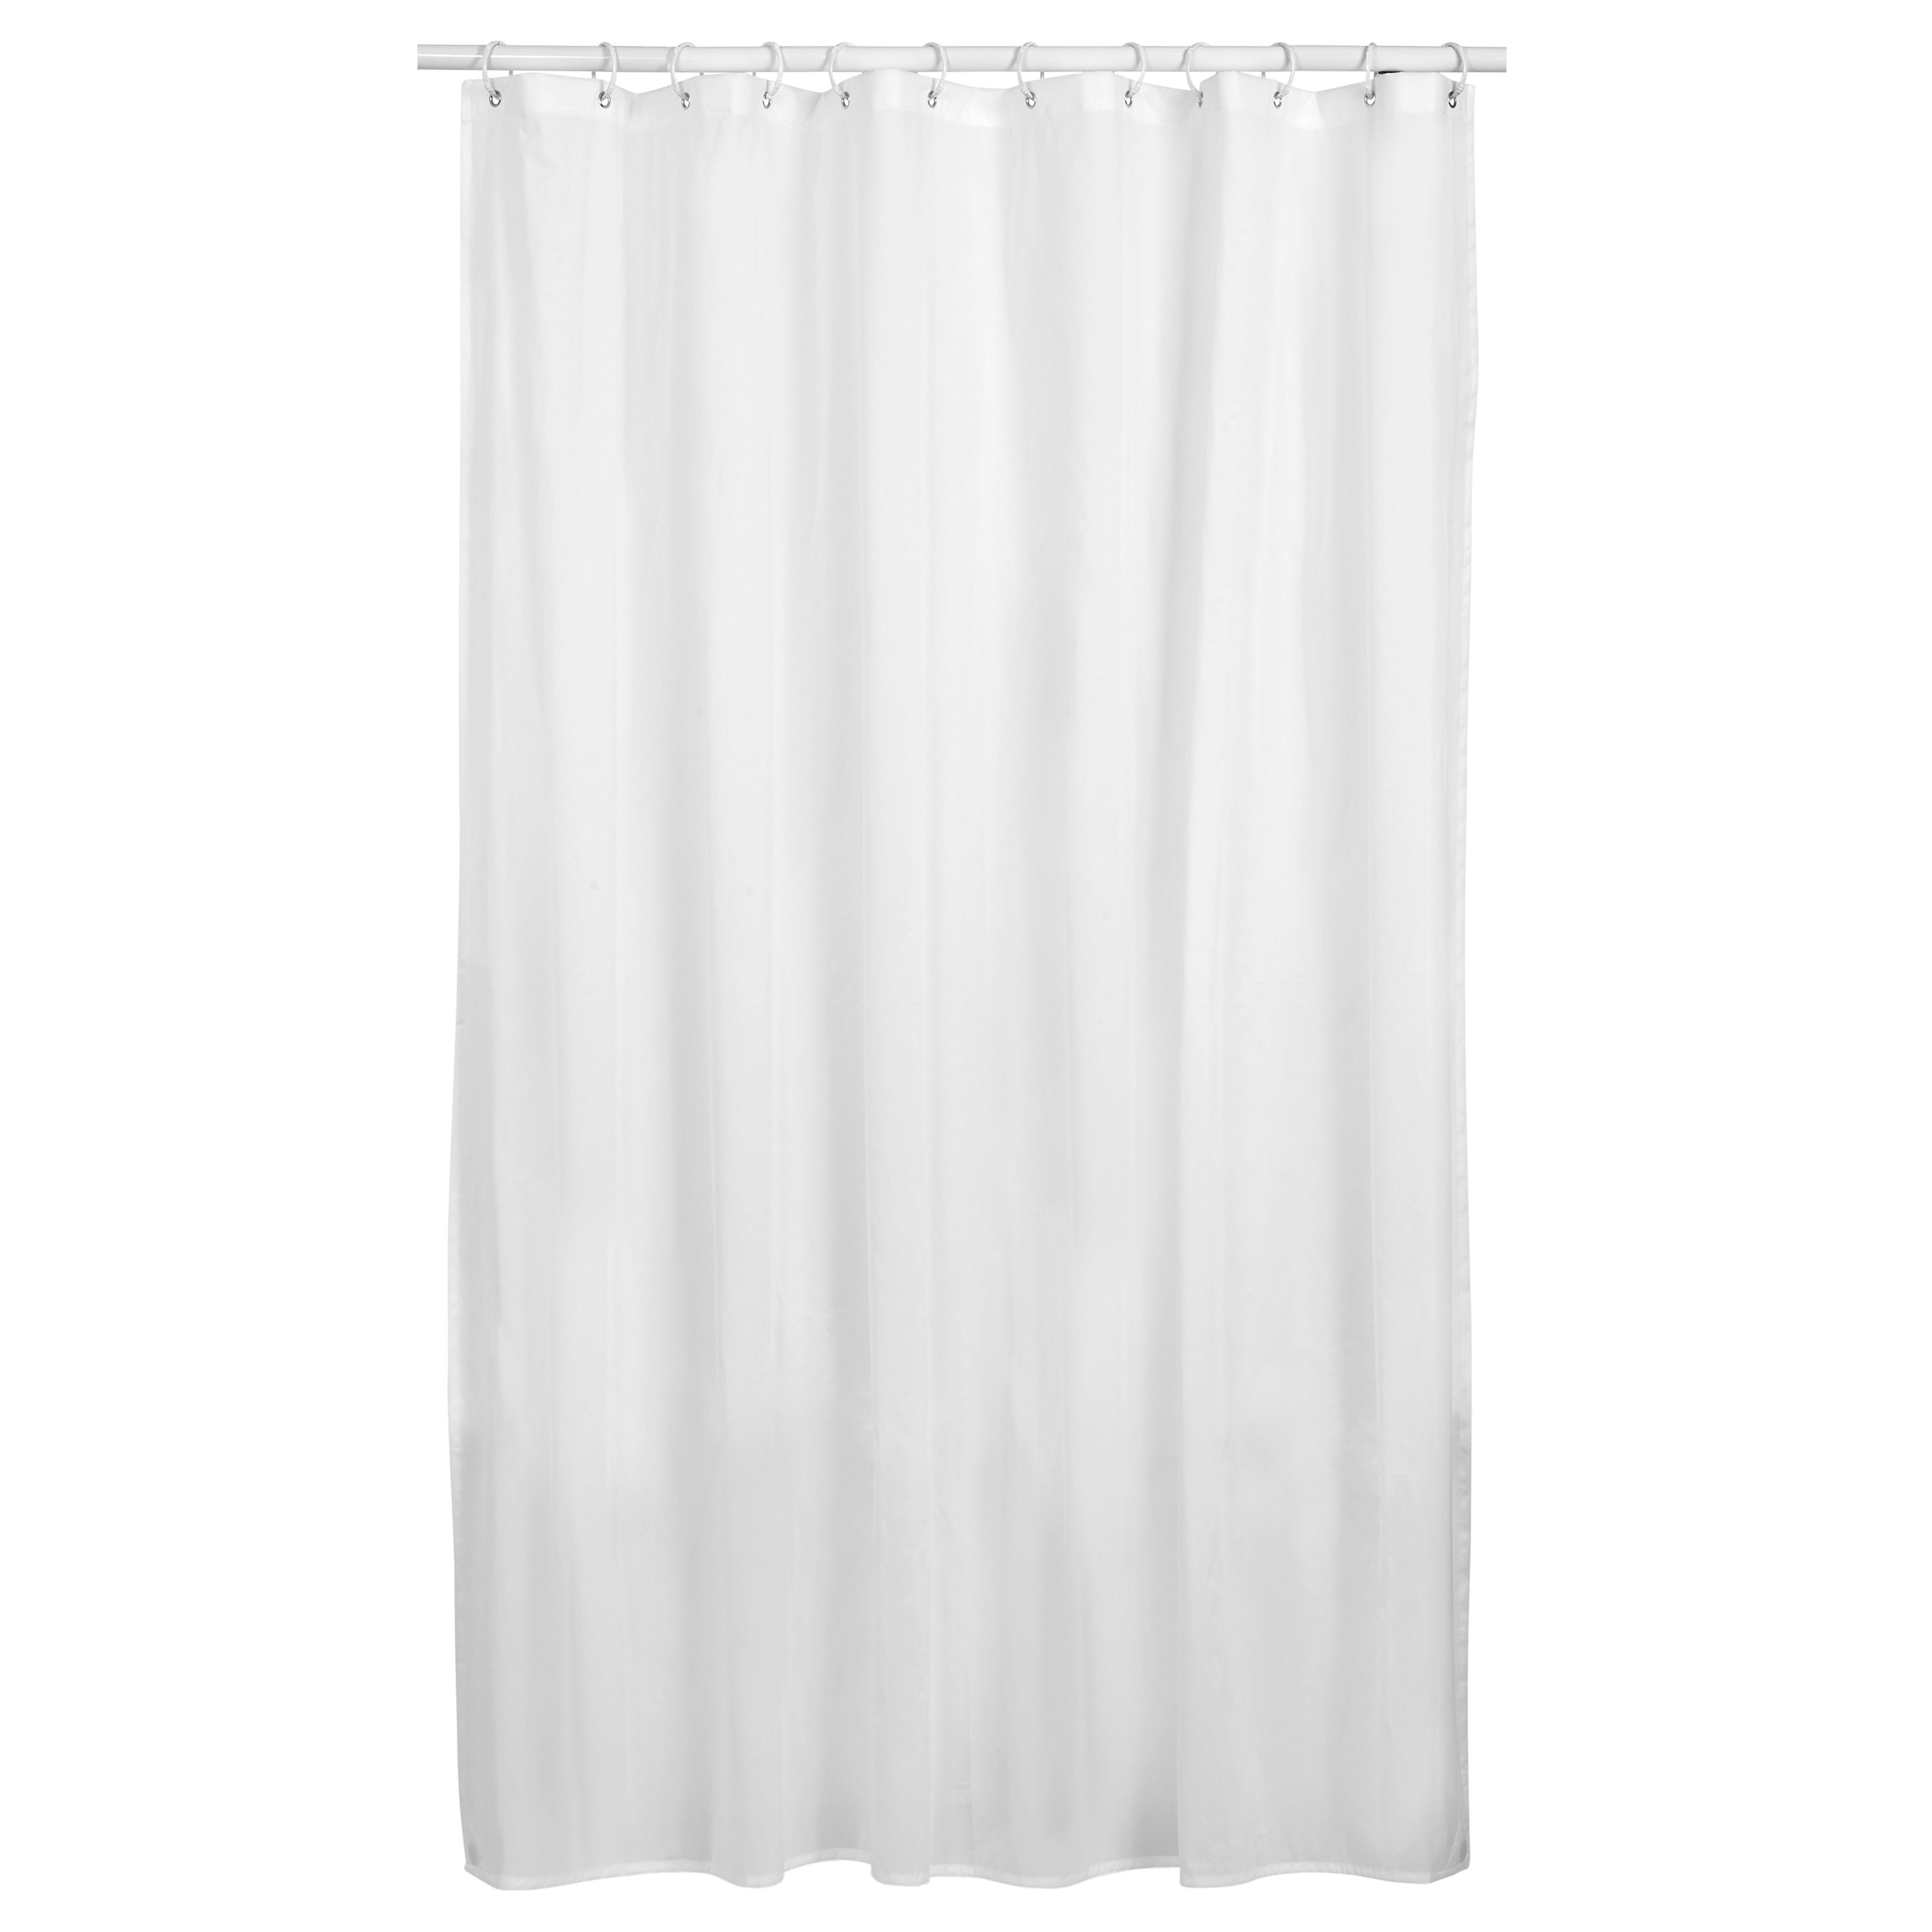 Grey Fabric Shower Curtain liner Mildew Resistant and Antimicrobial 72x72 